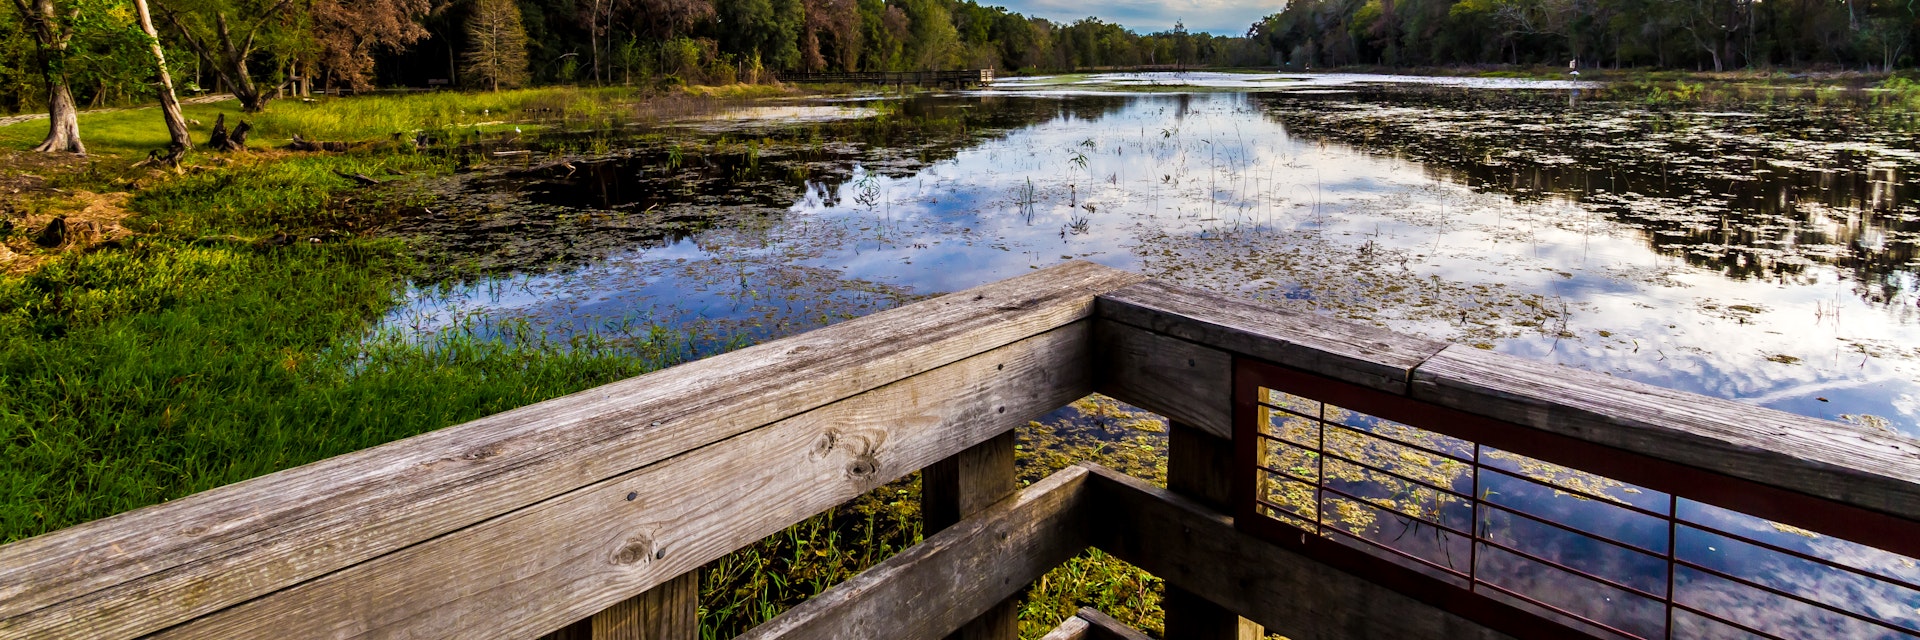 Dock at Creekfield Lake in Brazos Bend State Park.